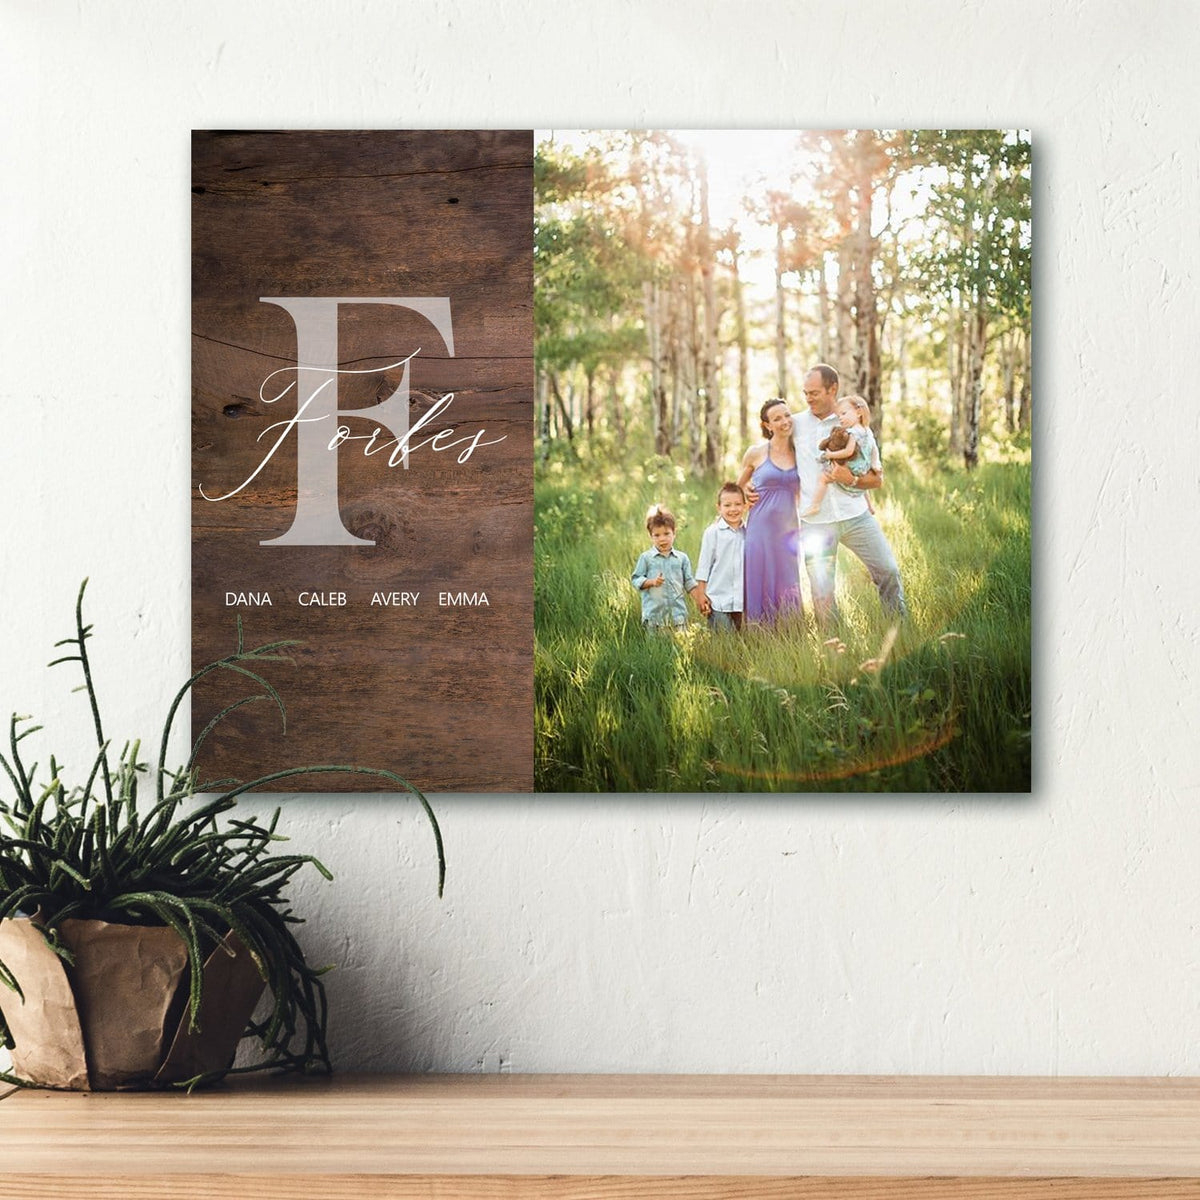 Decorate your walls with personalized art from your photos